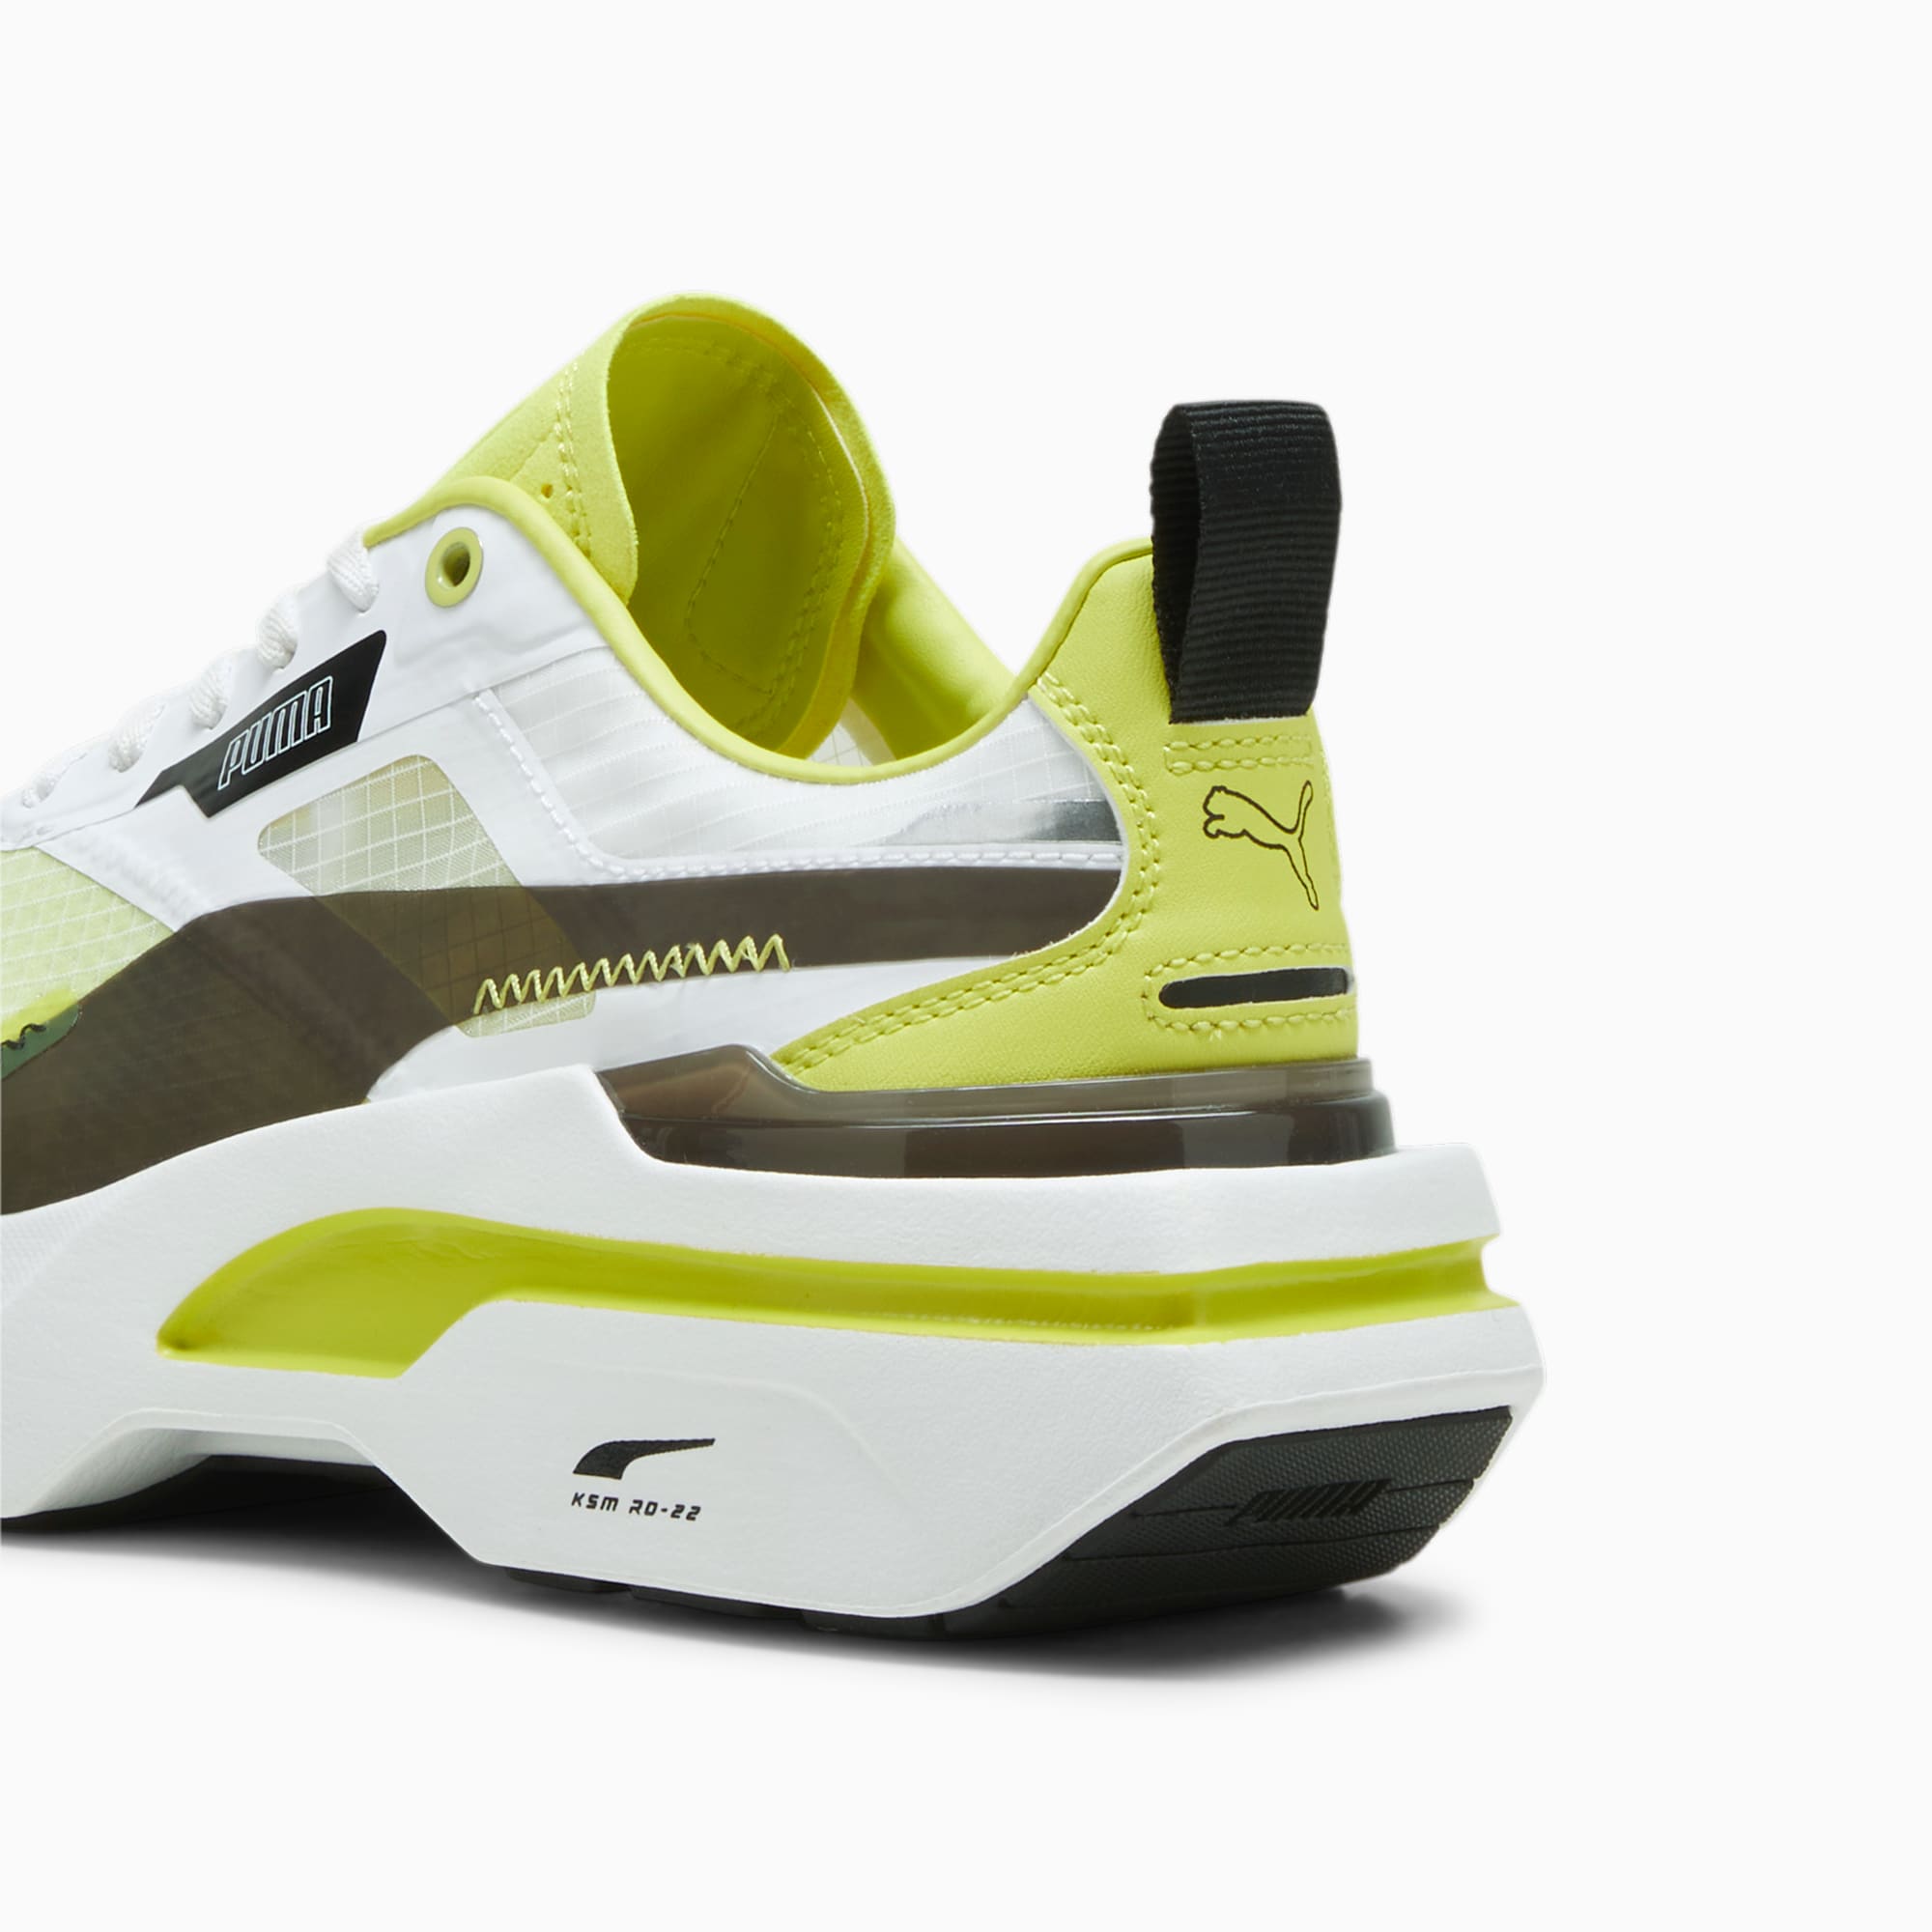 PUMA Kosmo Rider Women's Trainers, White/Lime Sheen, Size 35,5, Shoes